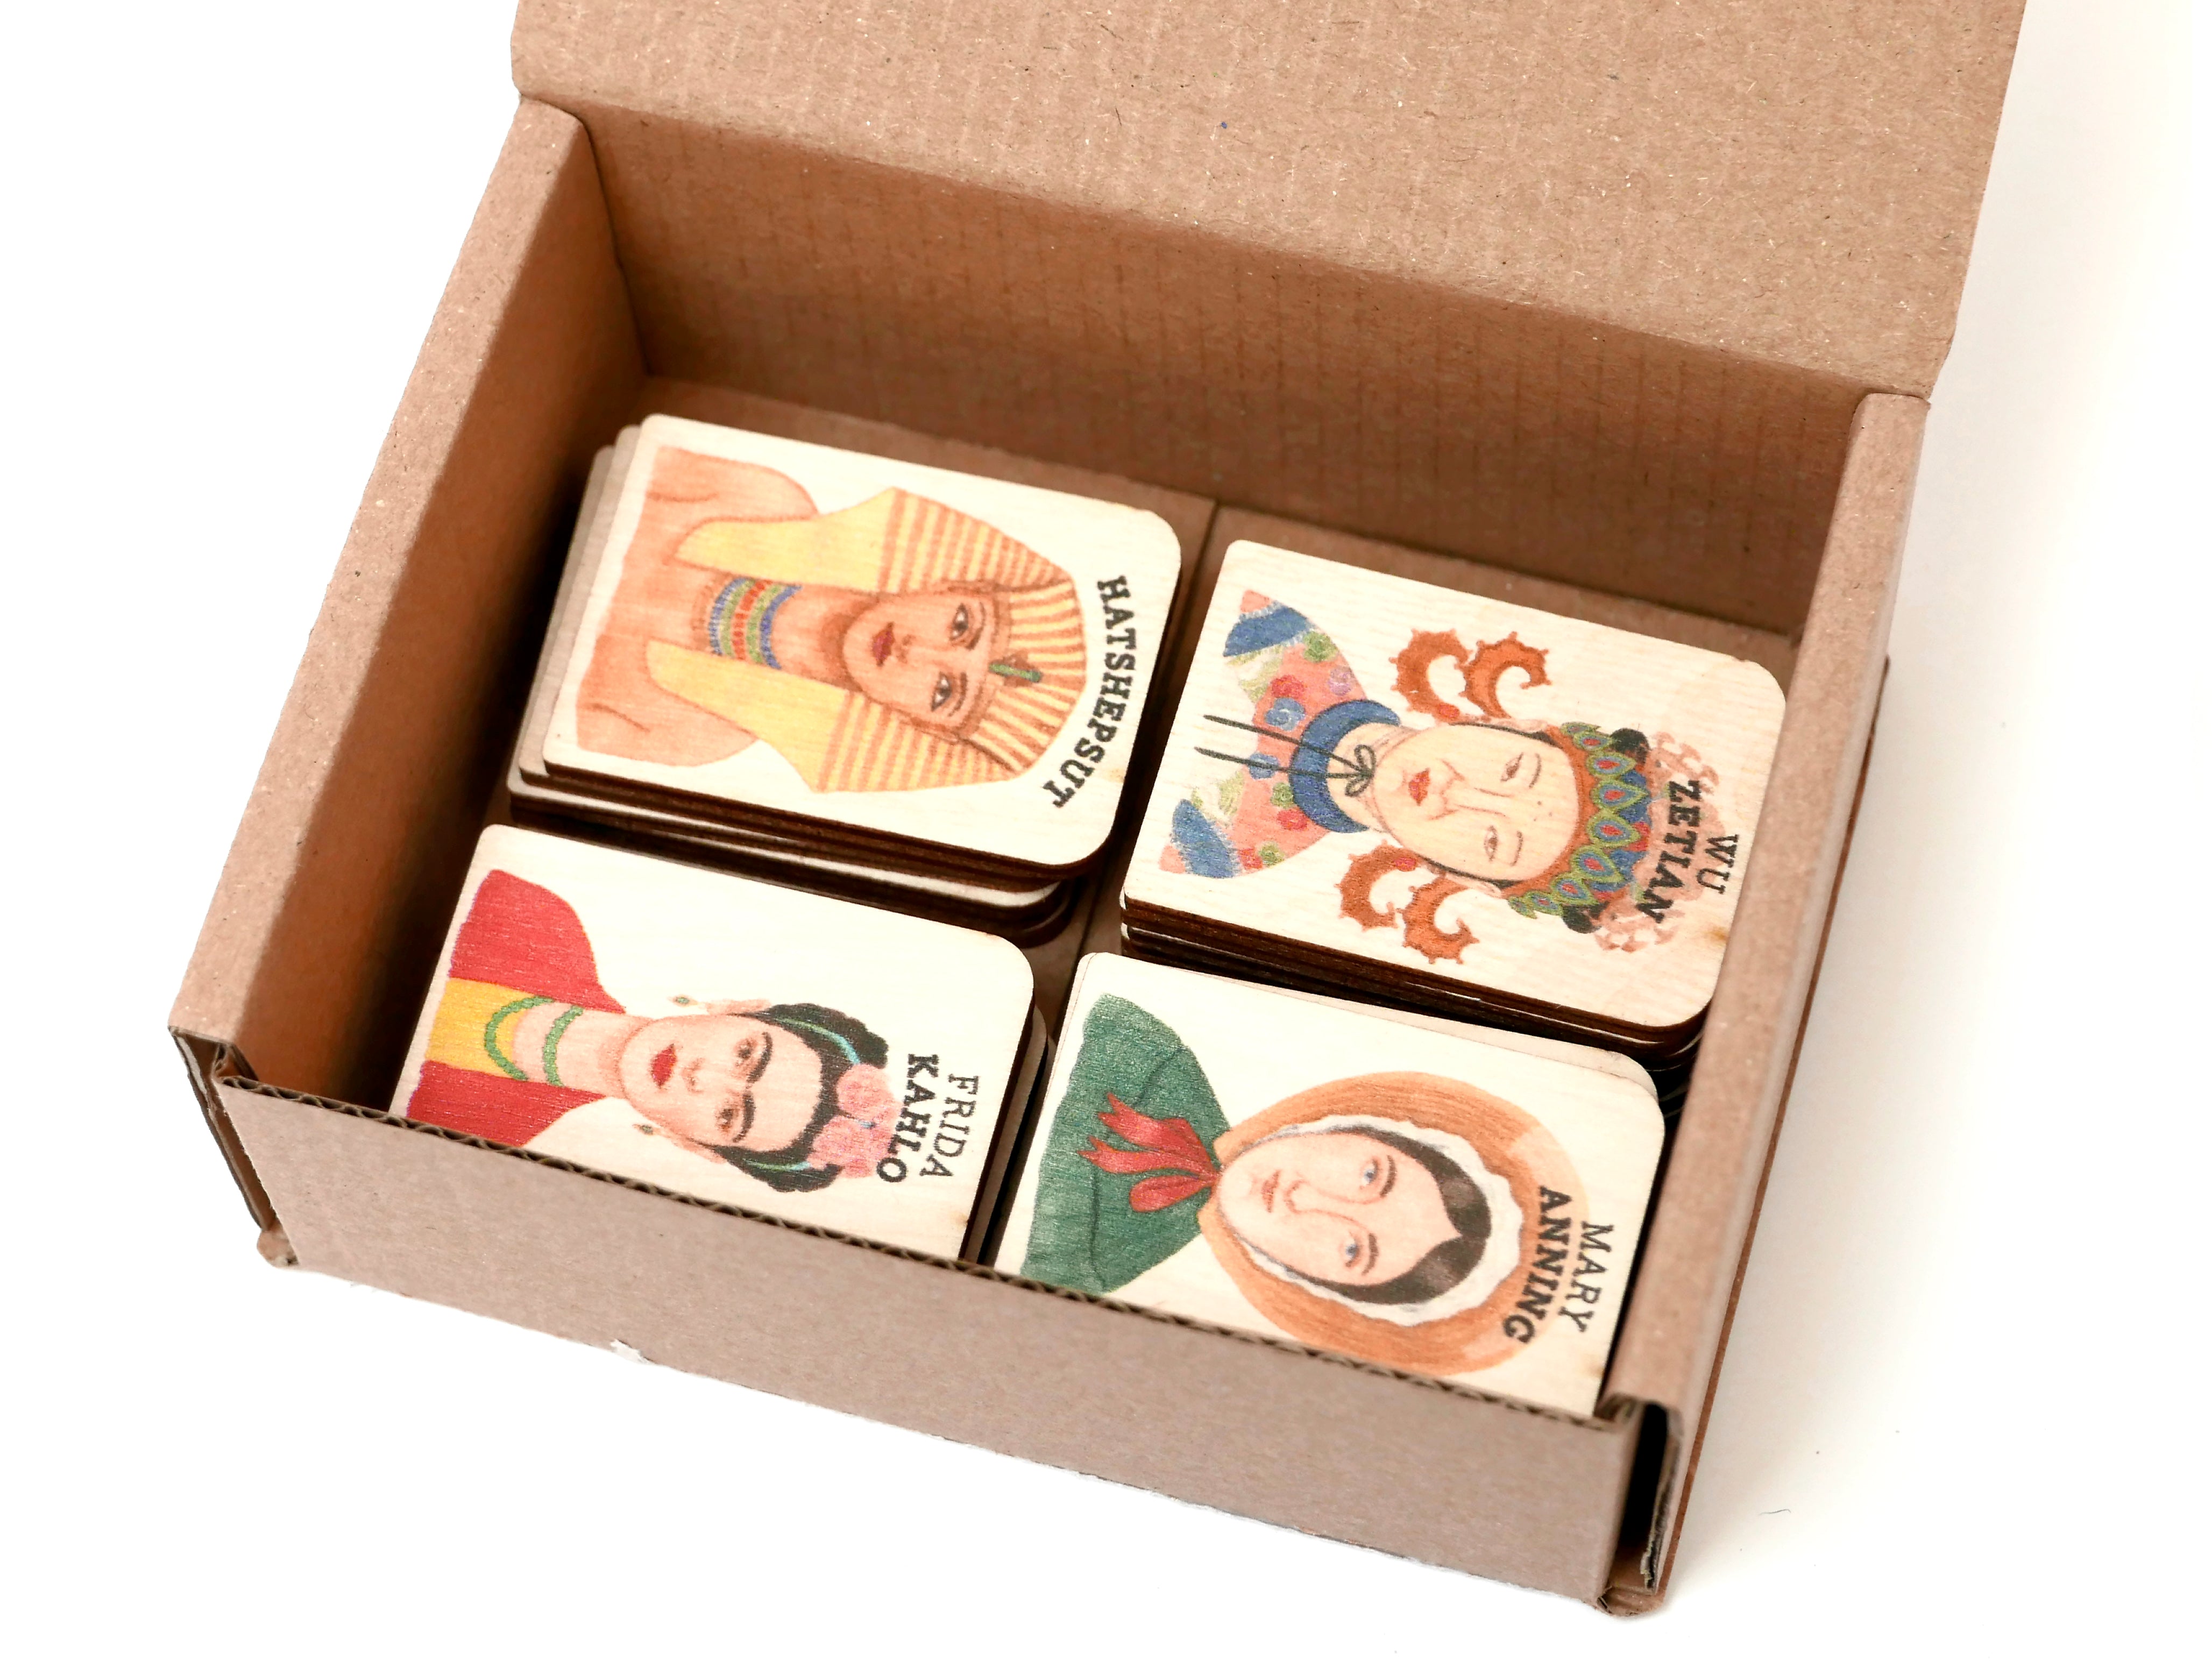 WHO'S SHE? wooden memo game | LIMITED